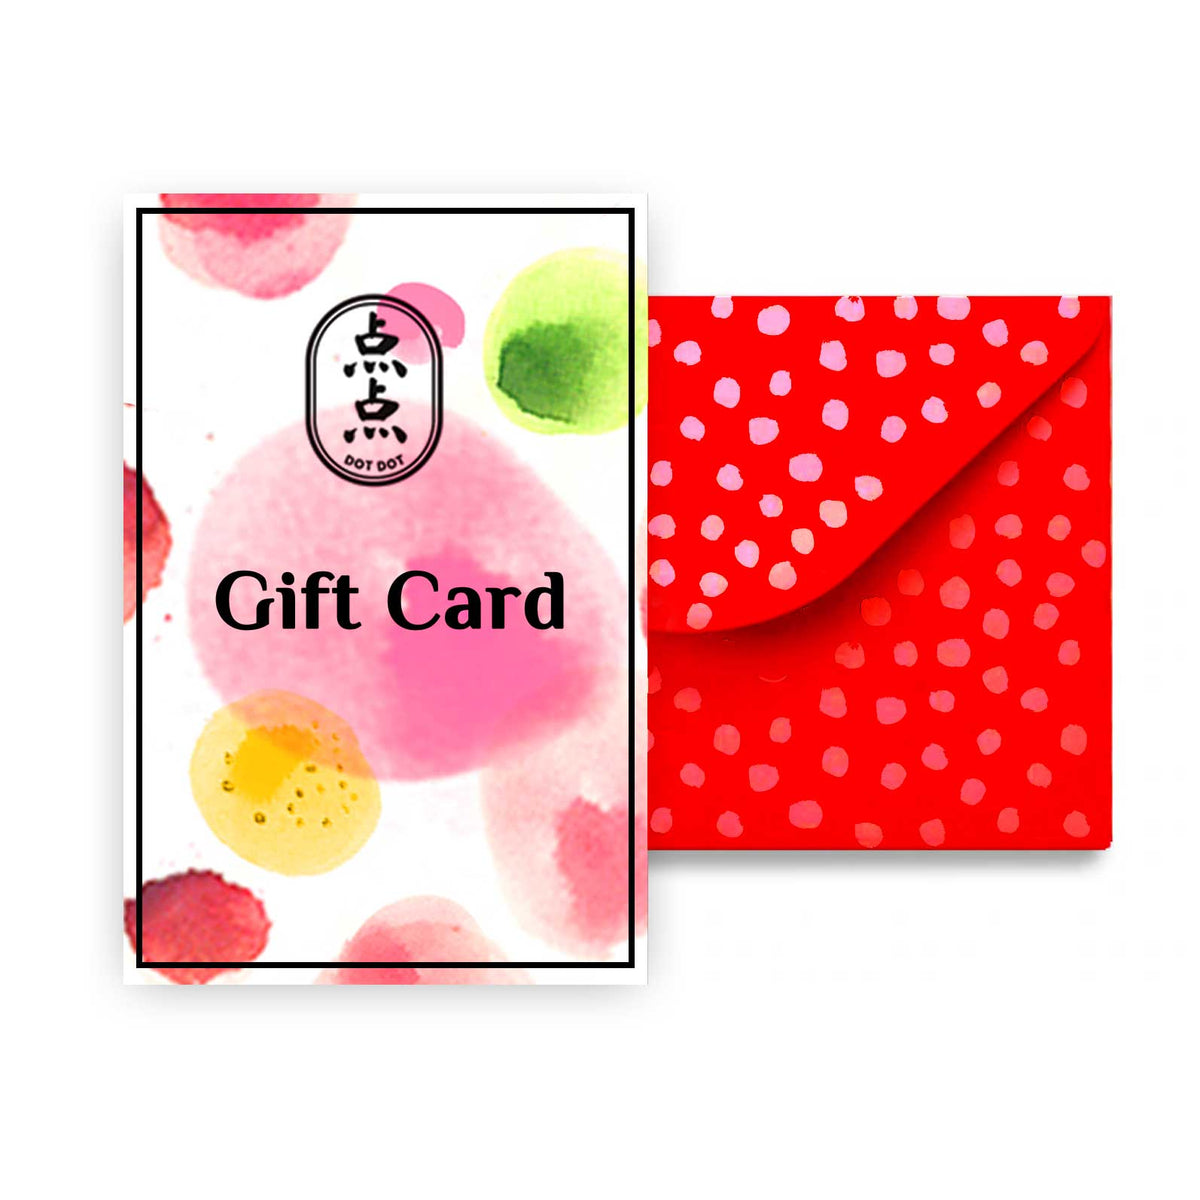 The Love Gift Card